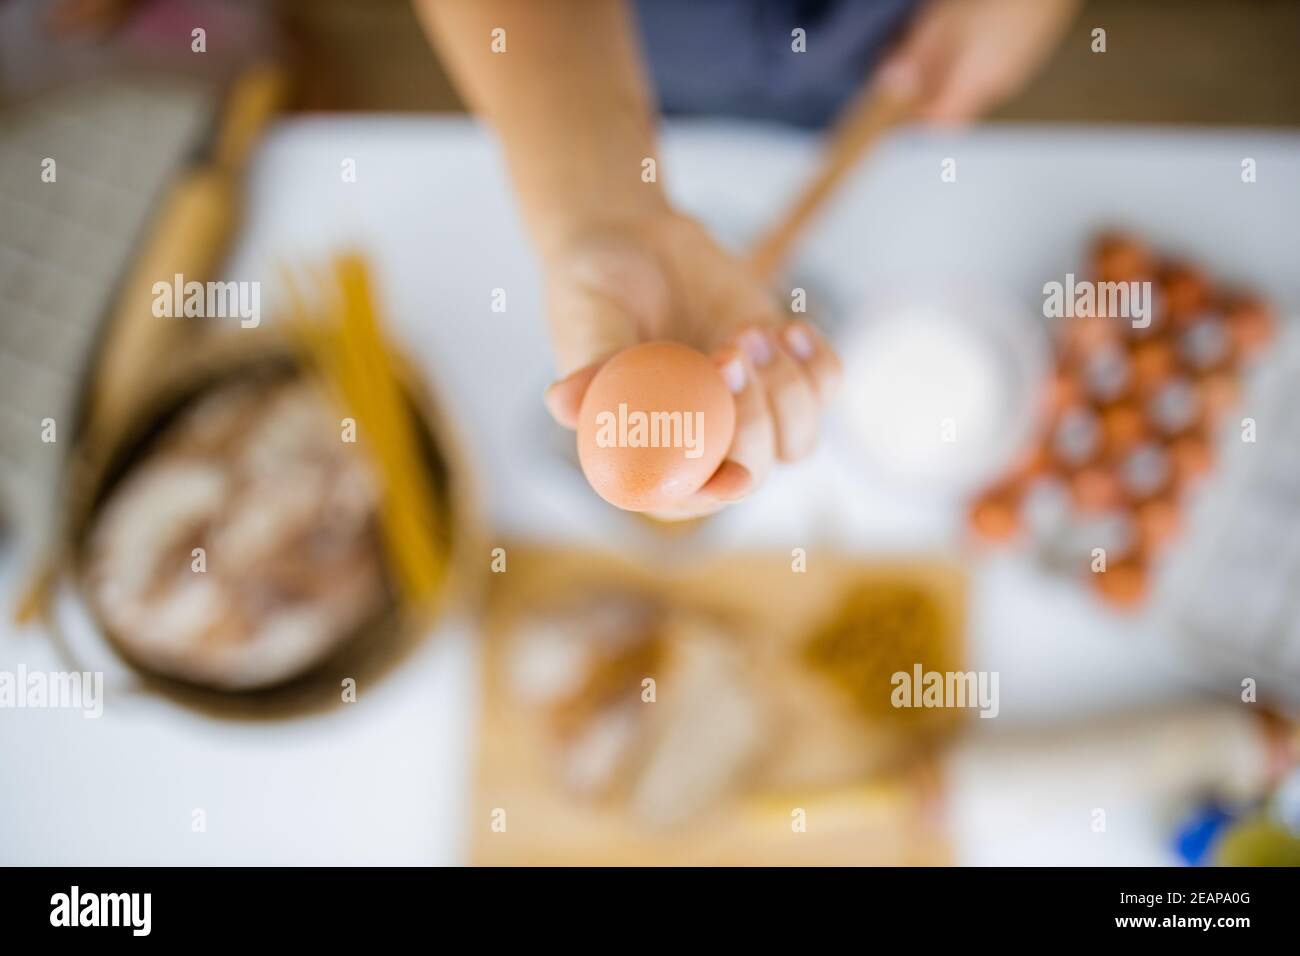 Female hand holding an egg above ingredients on a table Stock Photo